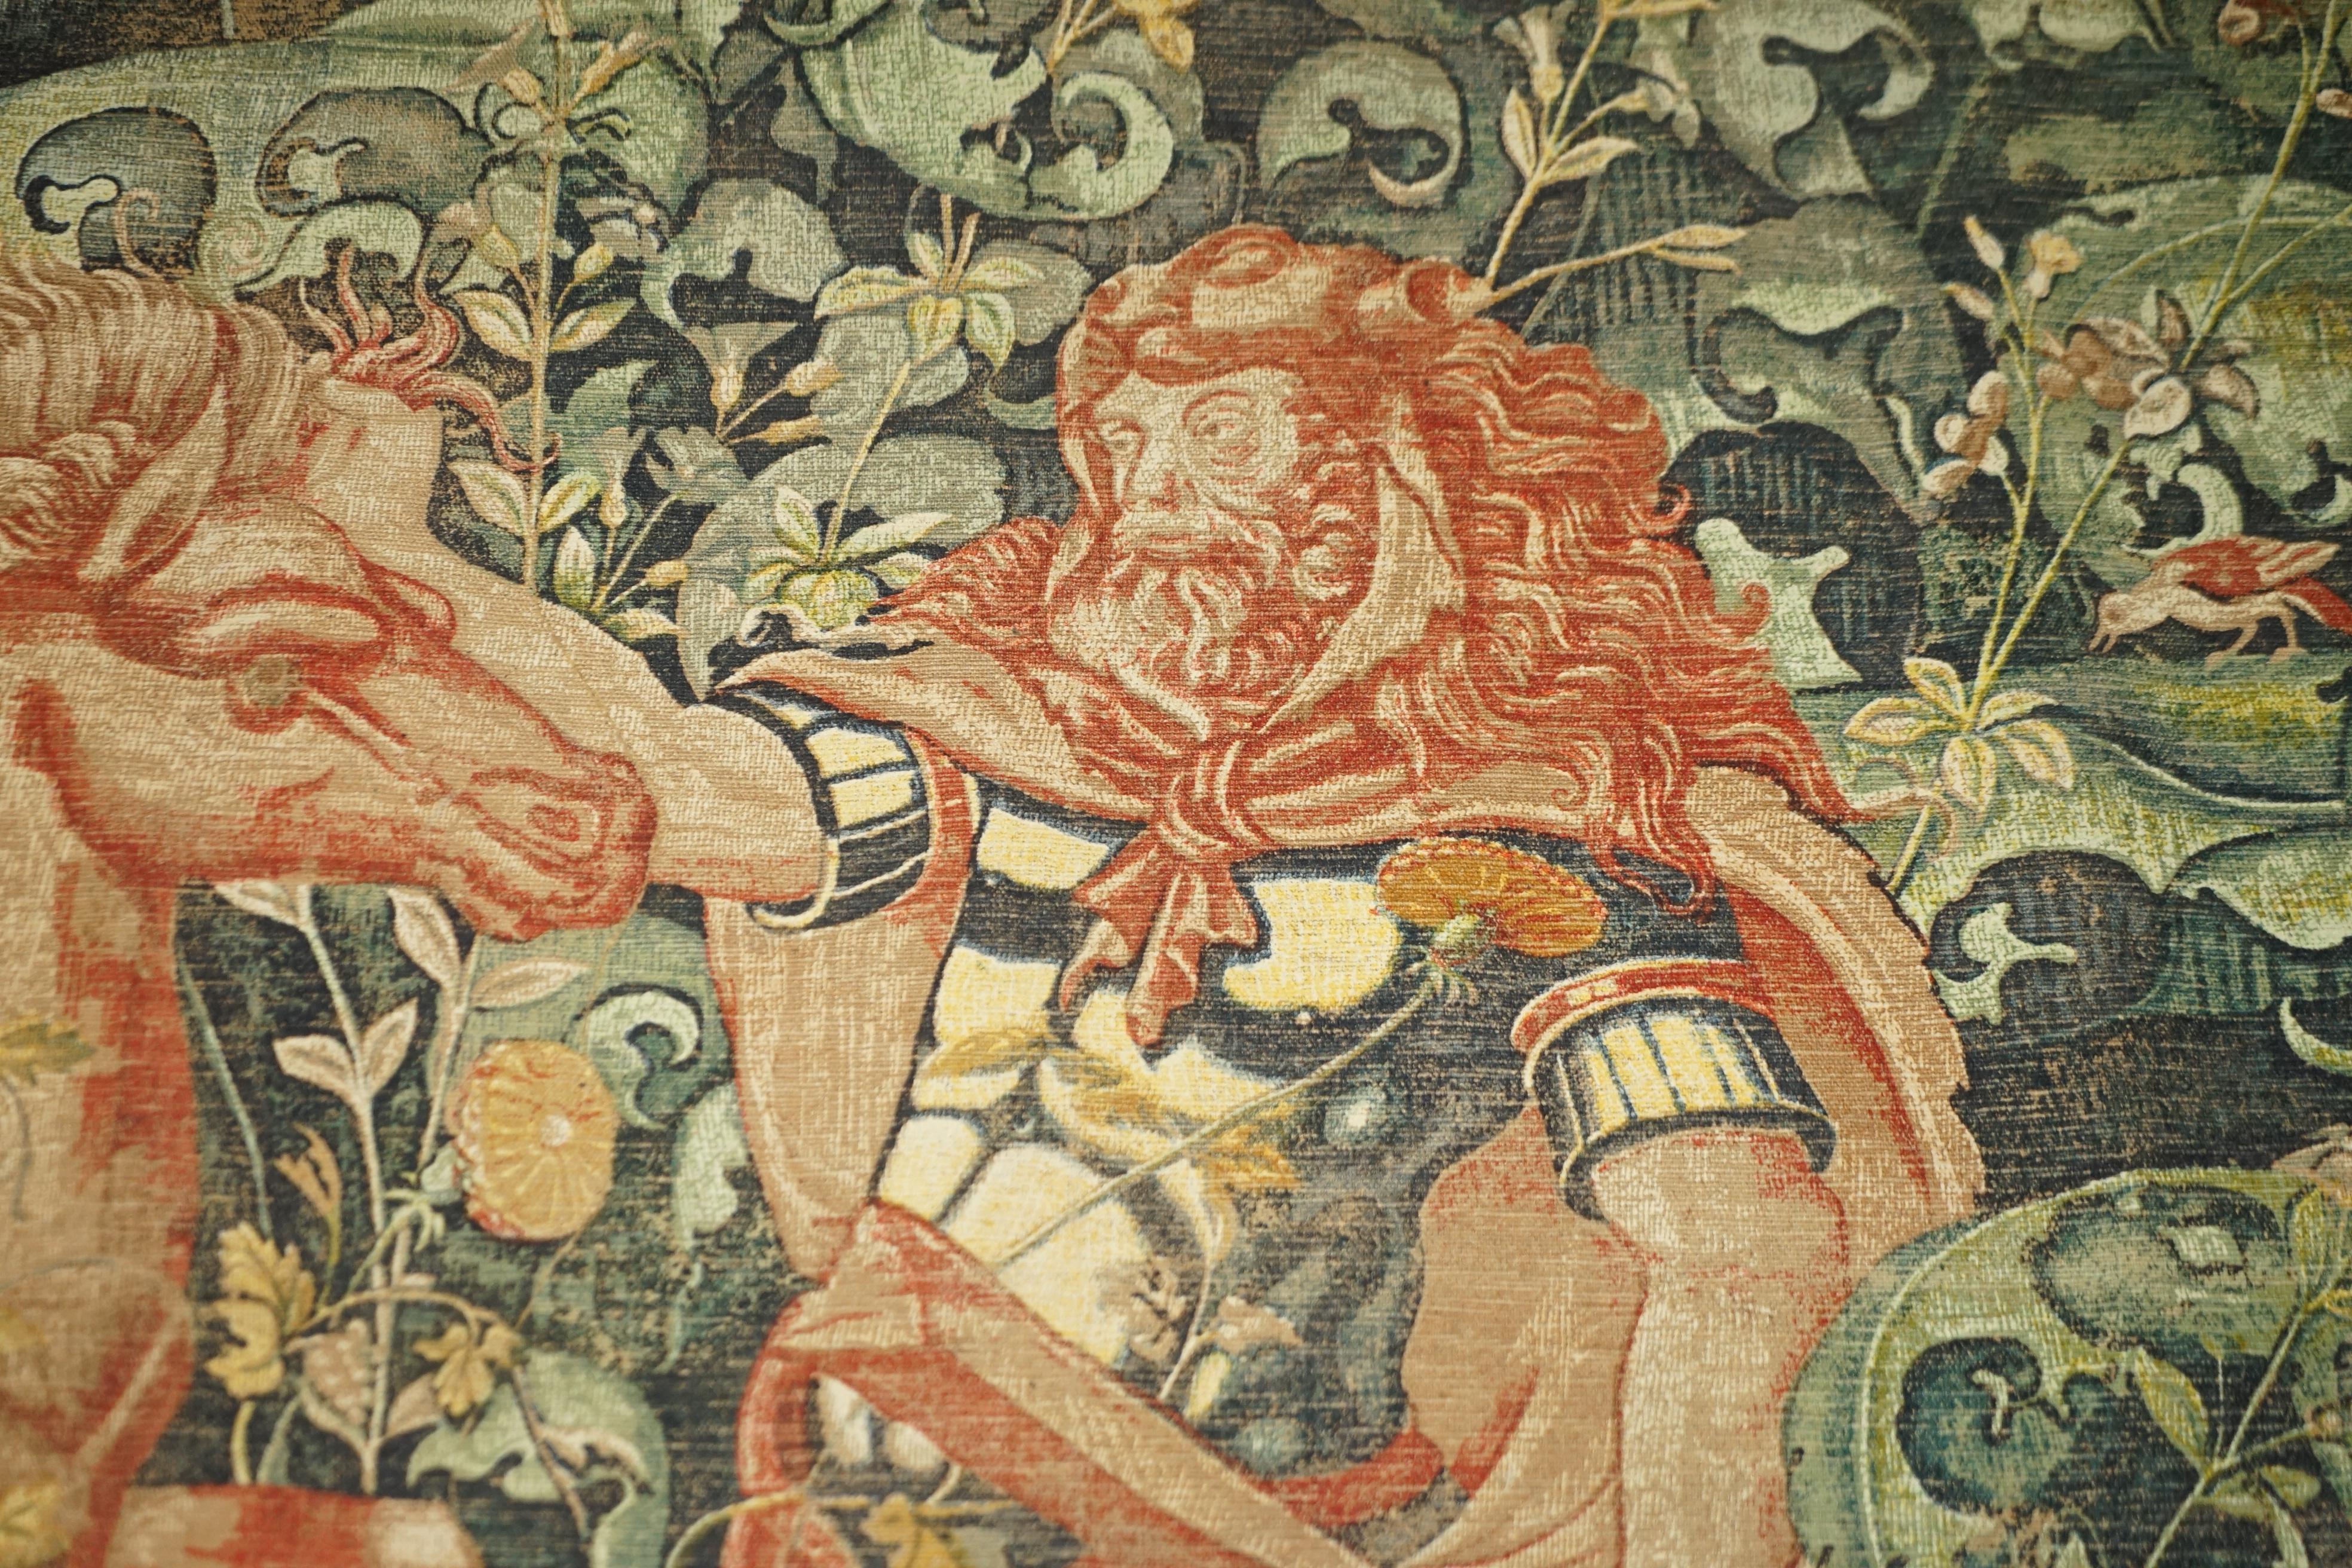 ANTIQUE THE LABOURS OF HERCULES TAPESTRY DiSPLAYED IN THE ROYAL PALACE MADRID 4